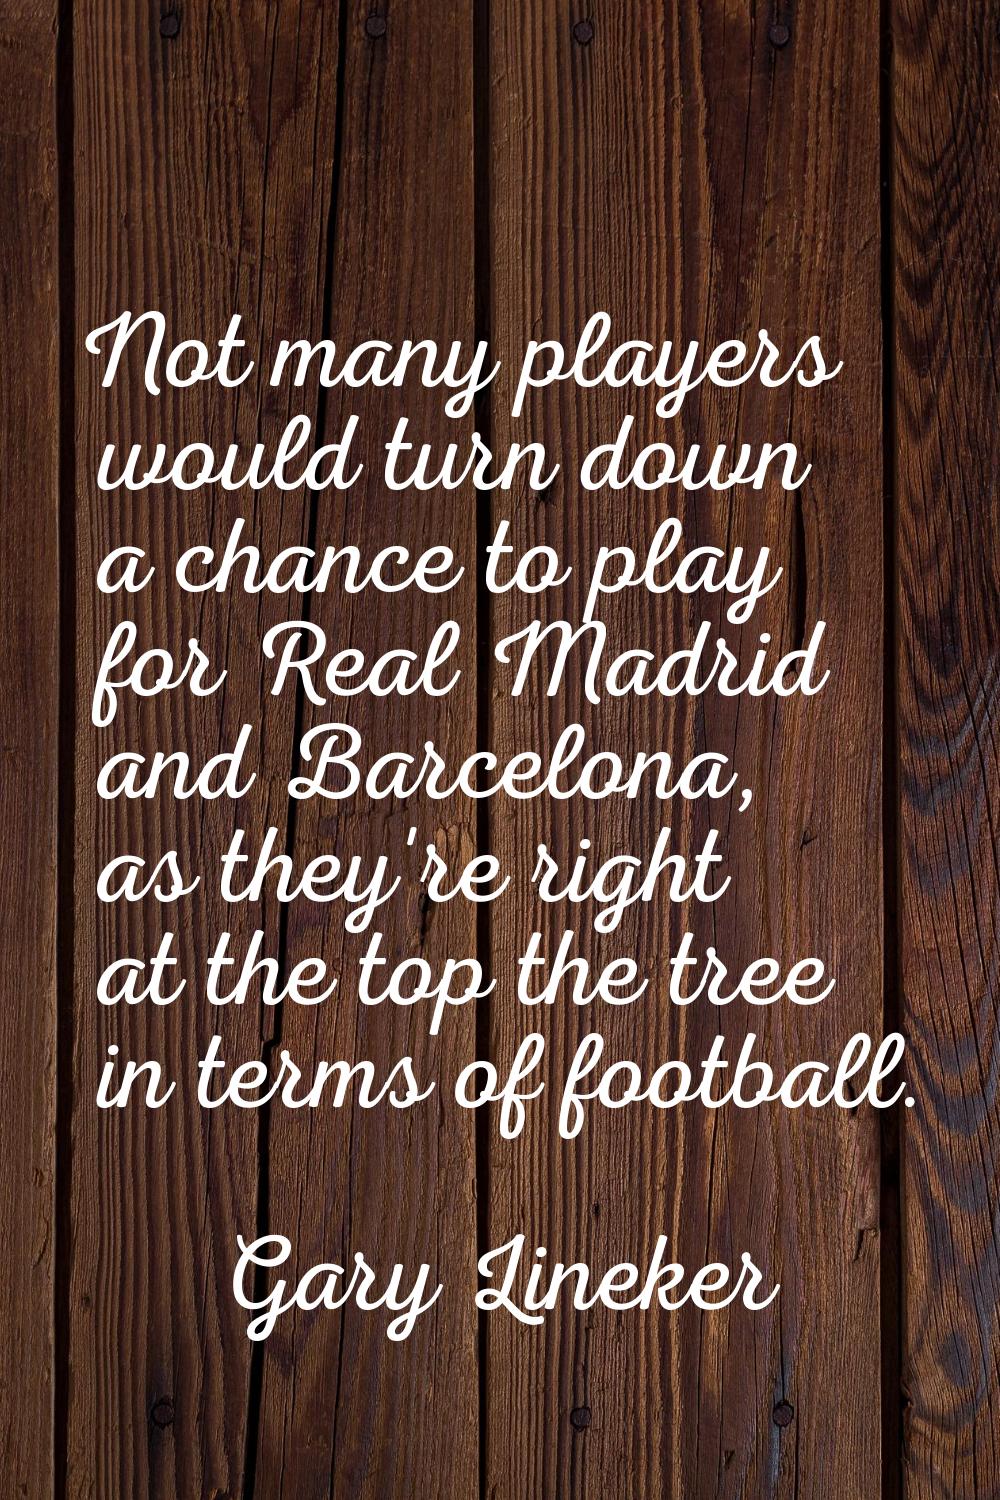 Not many players would turn down a chance to play for Real Madrid and Barcelona, as they're right a